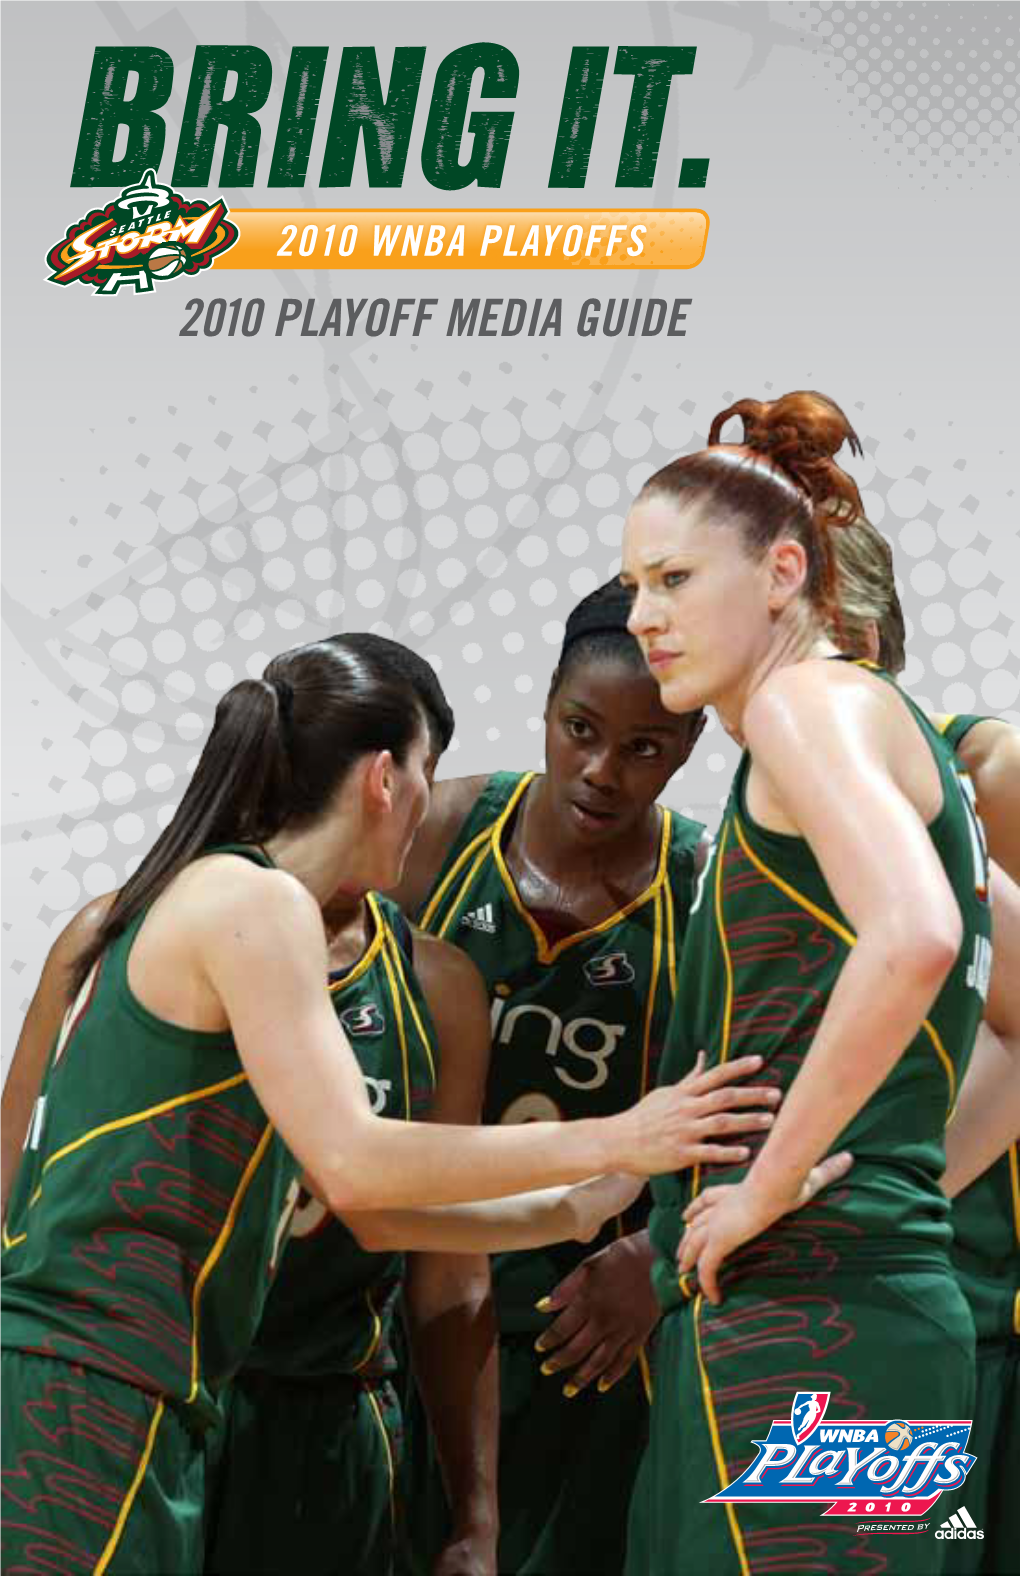 2010 Playoff Media Guide